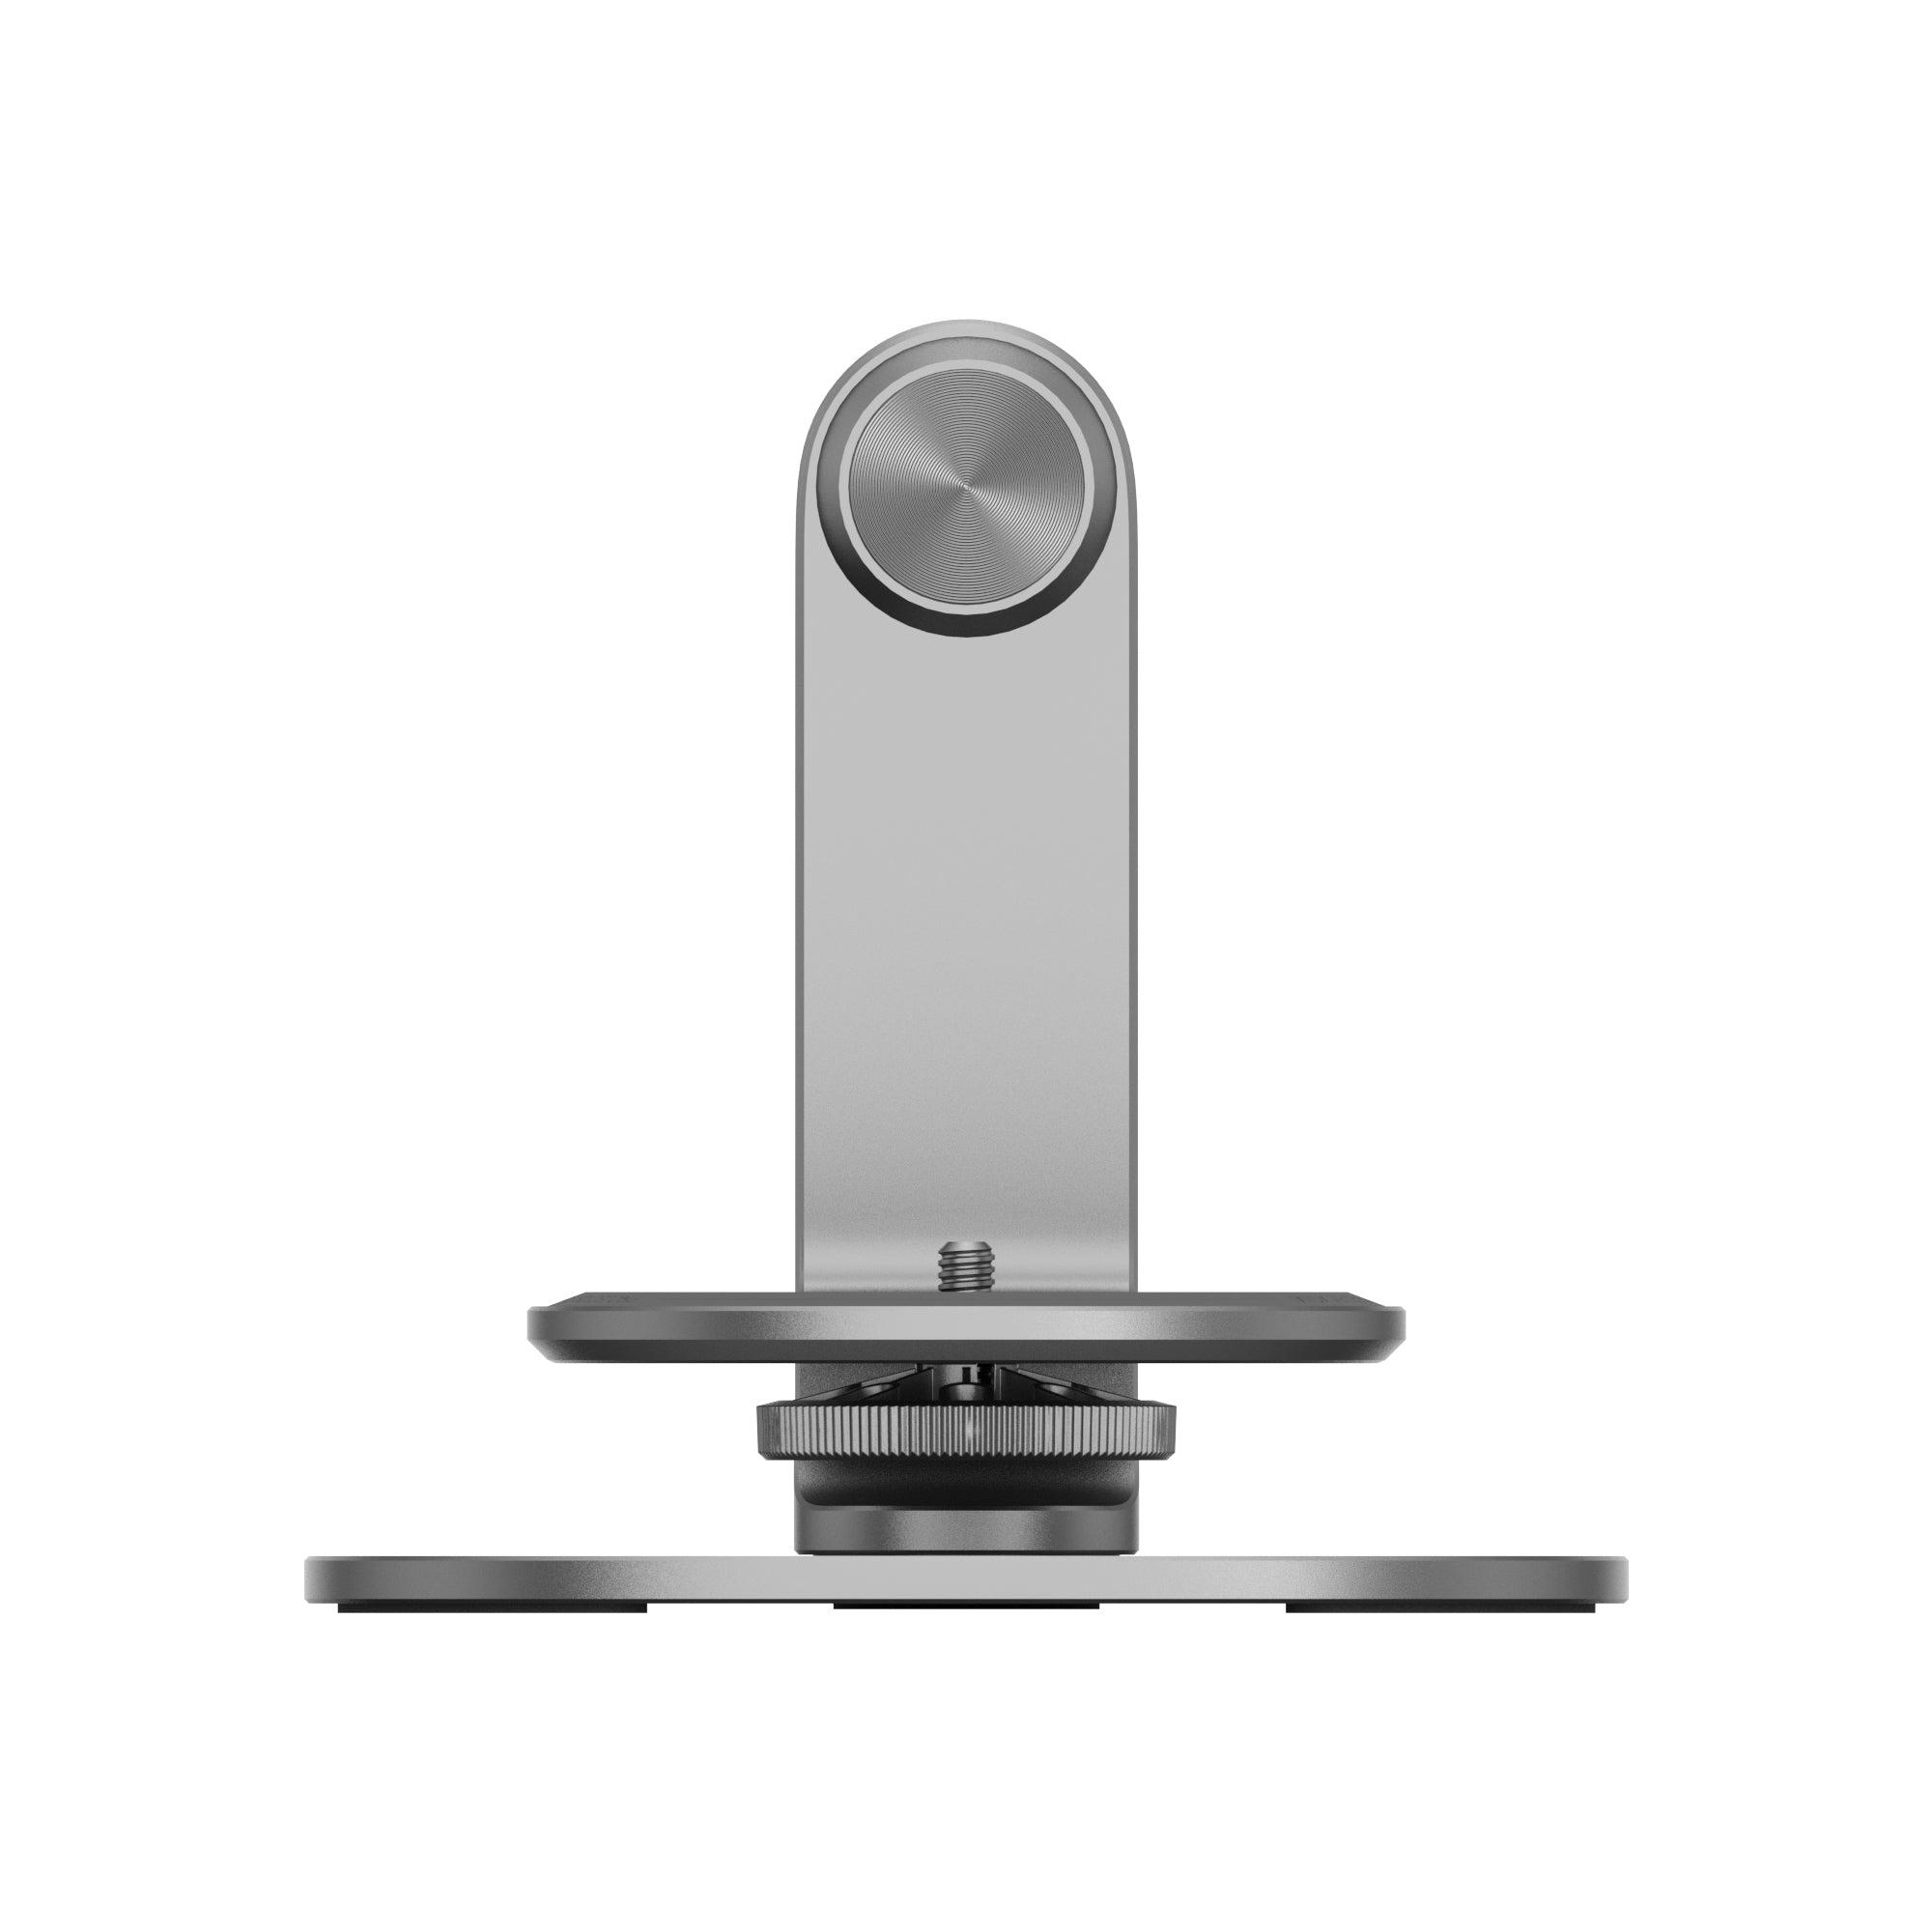 XGIMI Multi-Angle Projector Stand